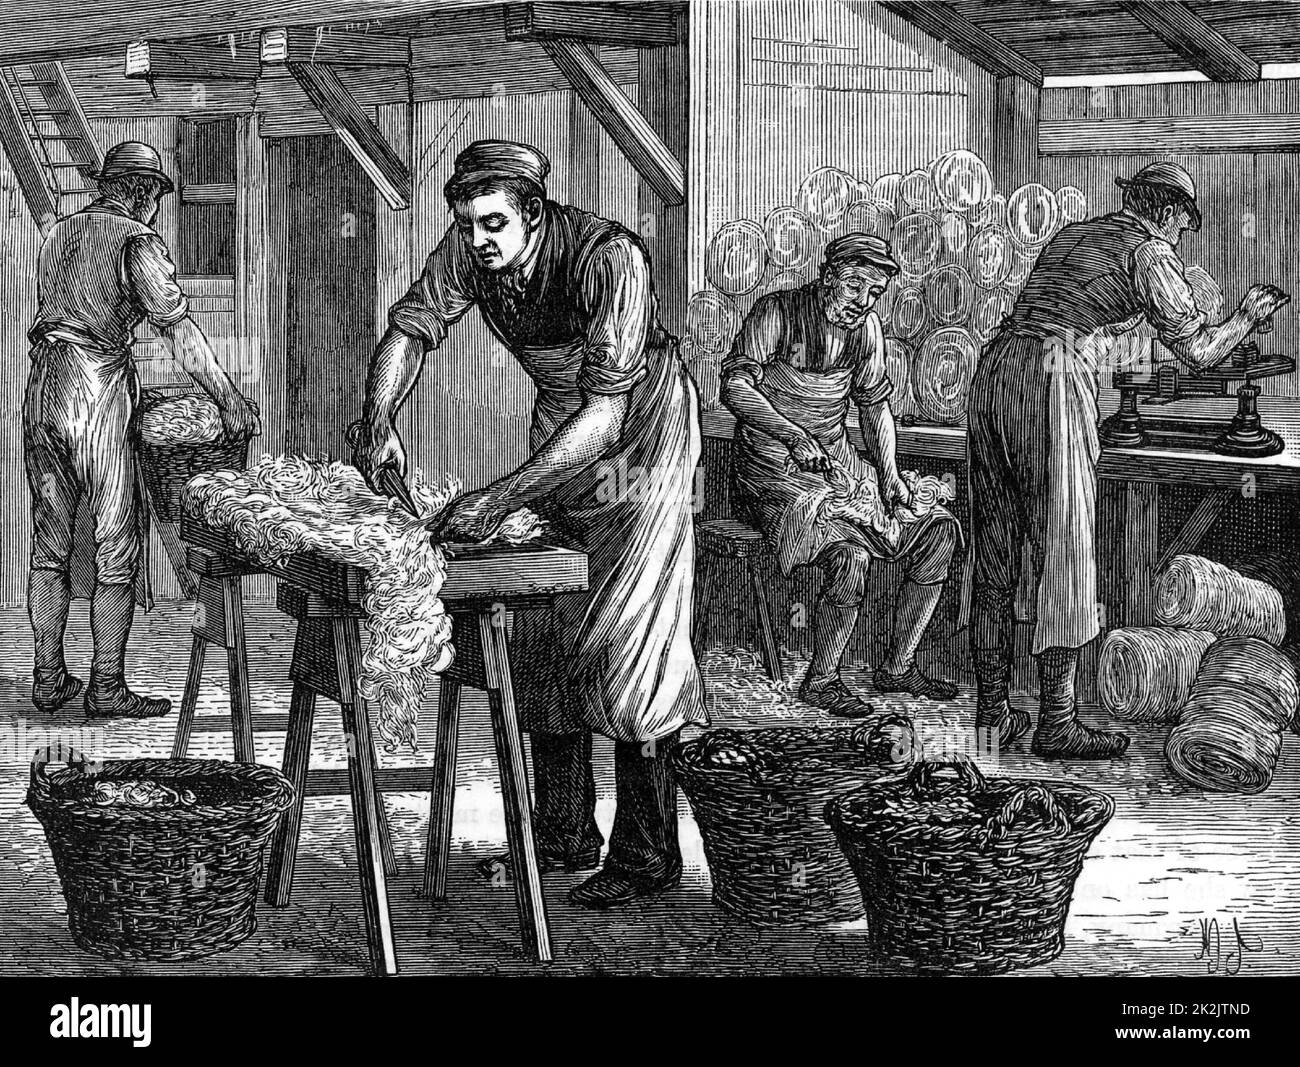 Woolsorters. These workers, who were employed by a woolstapler, sorted the wool from various areas of the fleeces into separate batches. Like tanners, they were at risk of contracting Anthrax from the fleeces. From 'Great Industries of Great Britain' (London, c1880). Engraving. Stock Photo